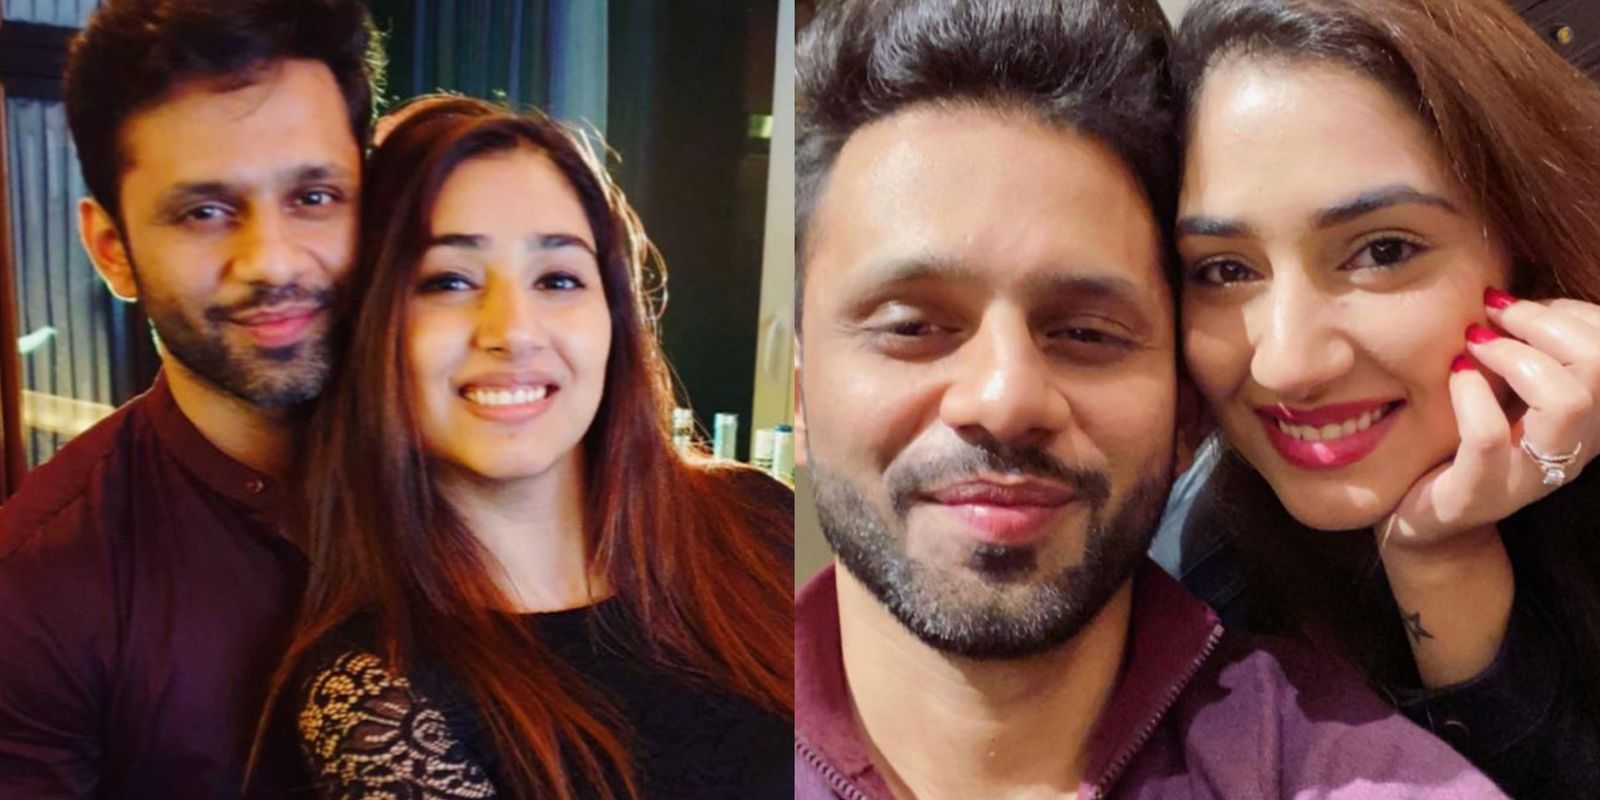 Bigg Boss 14: Rahul Vaidya’s Would-Be Wife Disha Parmar To Enter The BB House On Valentine’s Day